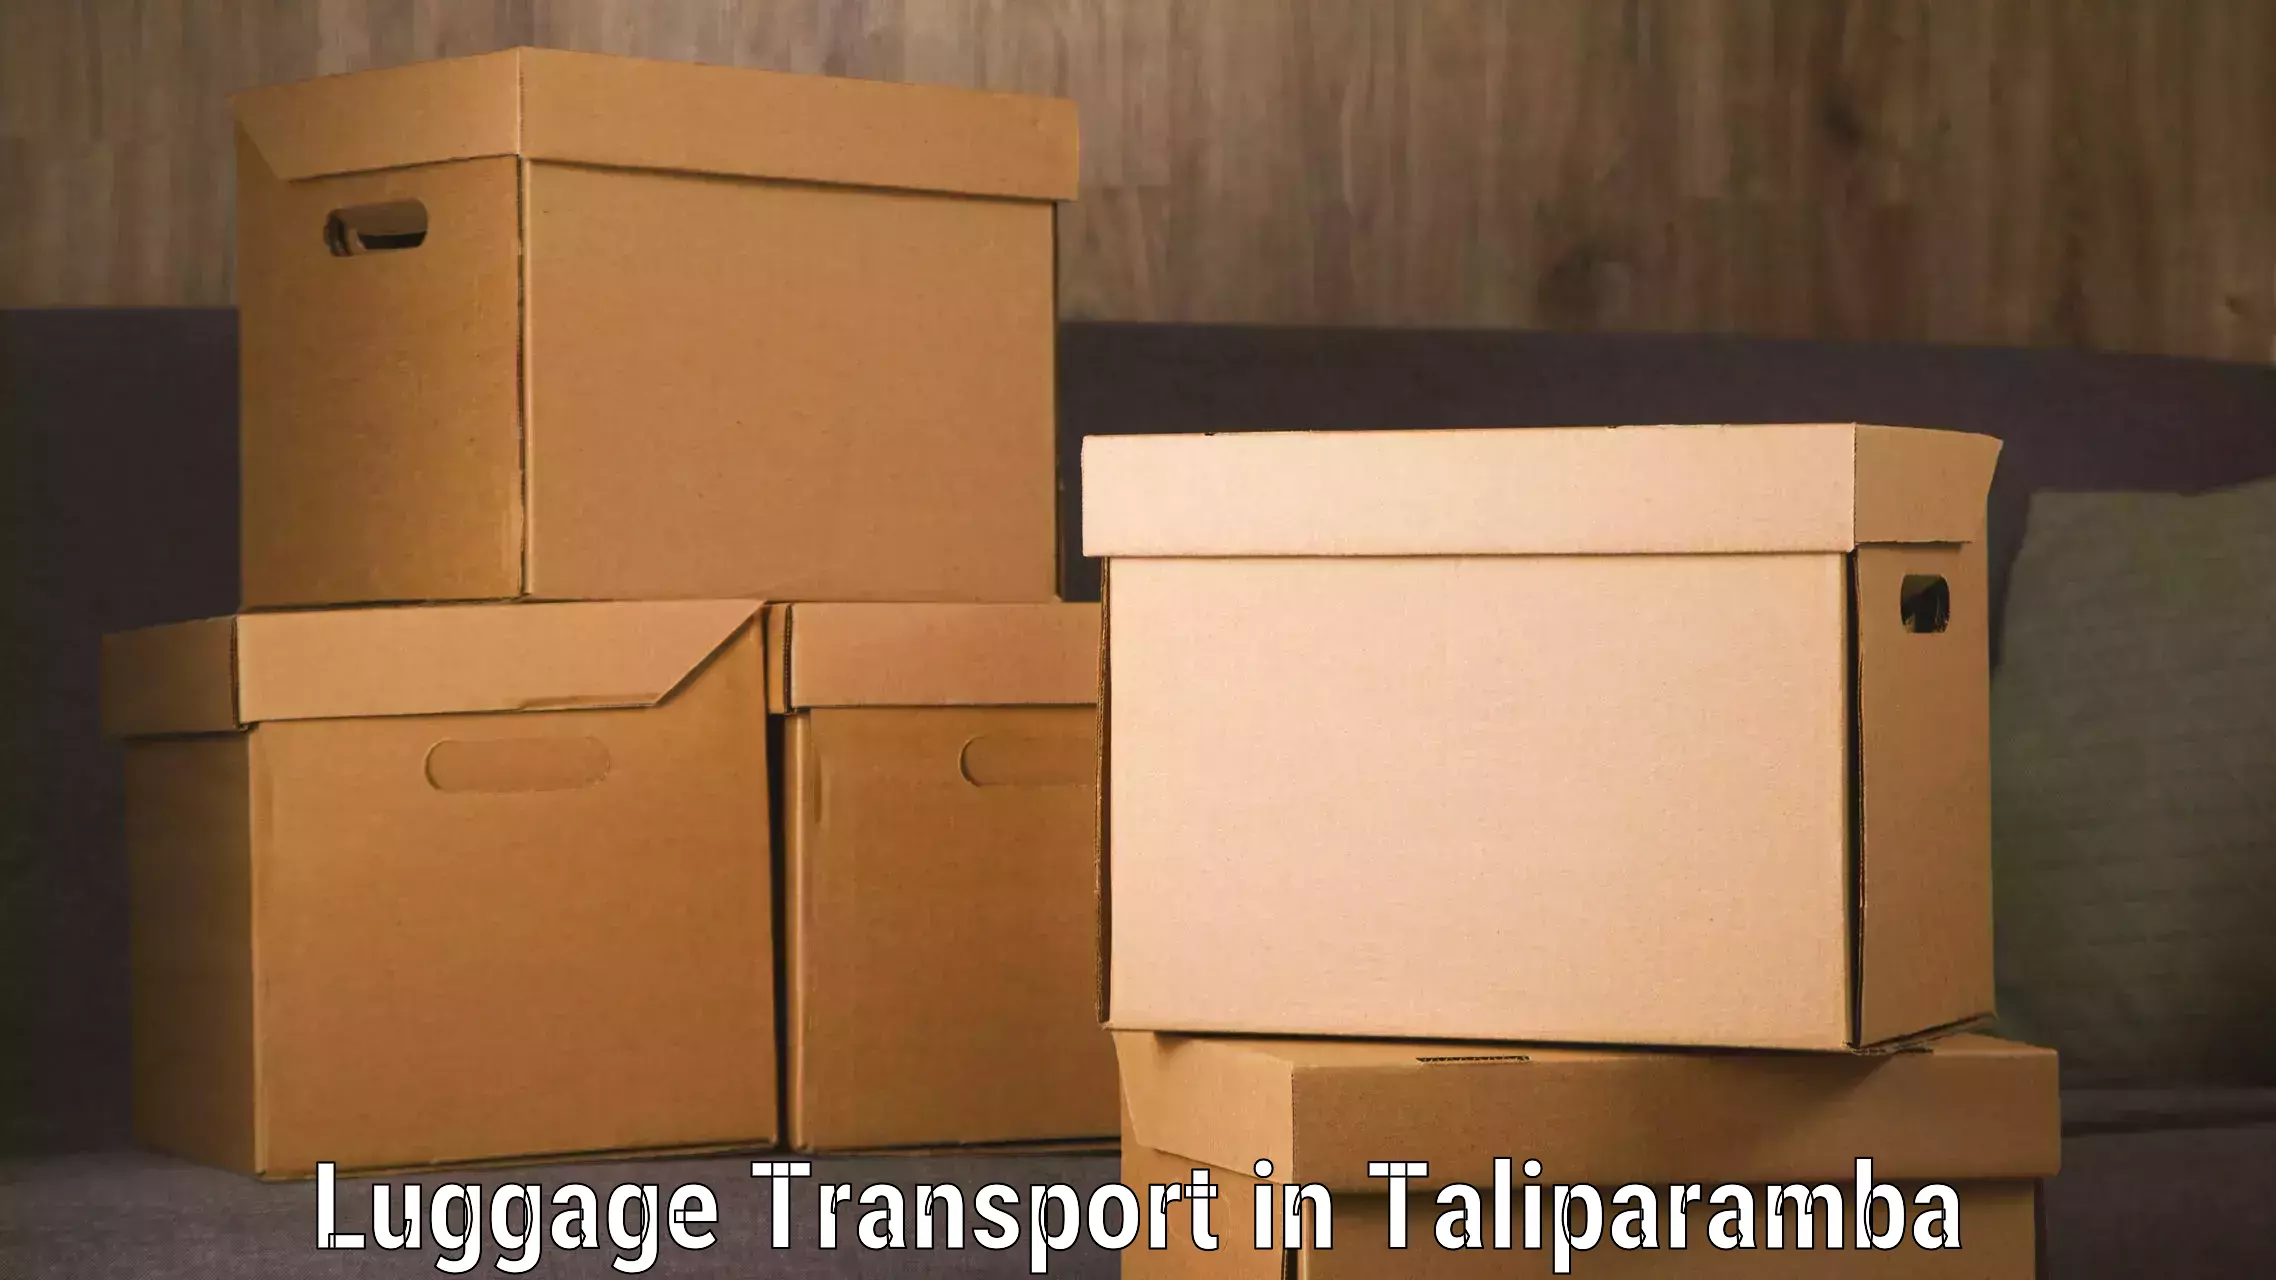 Luggage transport deals in Taliparamba